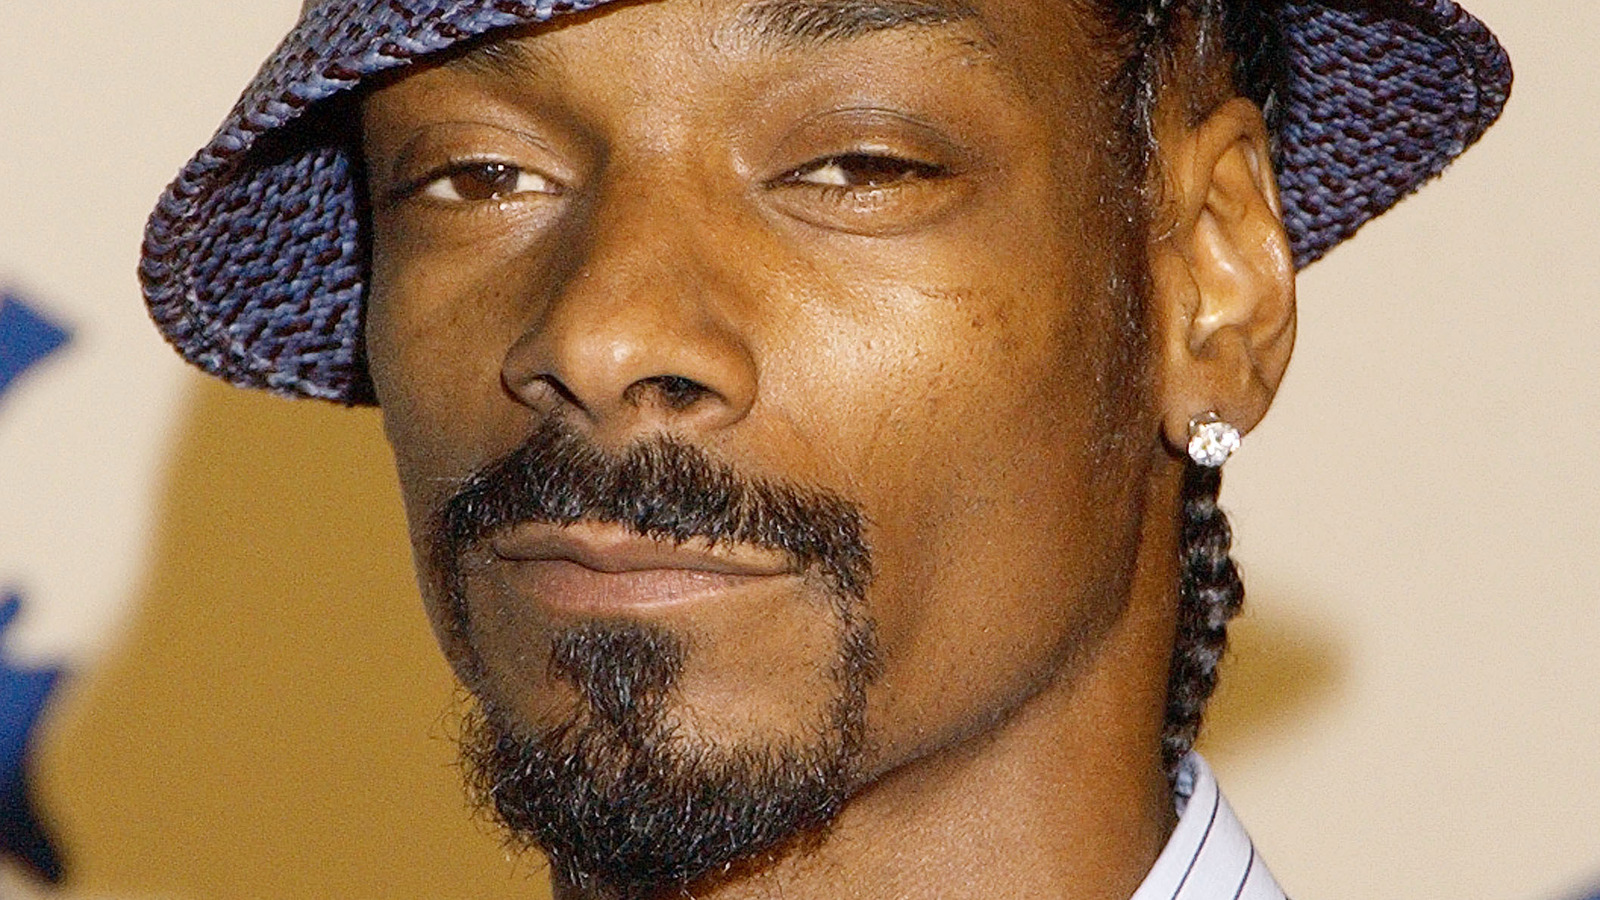 https://www.nickiswift.com/img/gallery/whats-the-real-meaning-of-drop-it-like-its-hot-by-snoop-dogg-heres-what-we-think/l-intro-1644691185.jpg